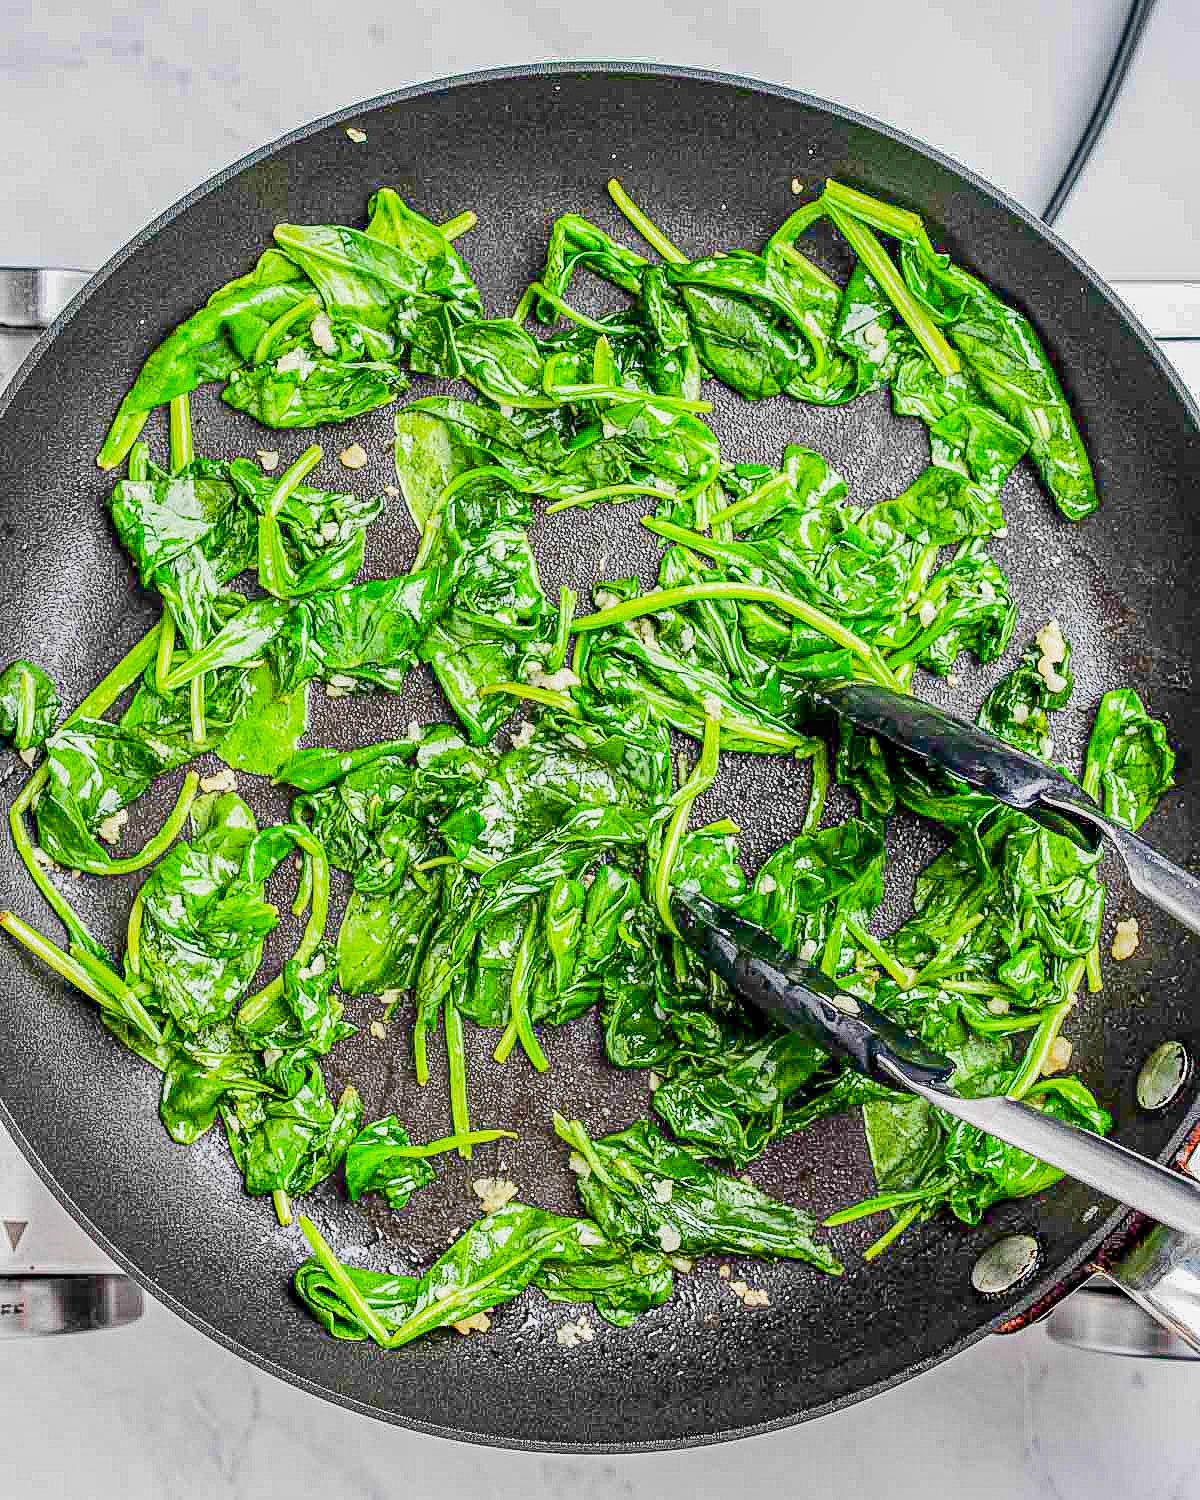 Sautéed spinach in a frying pan with tongs.